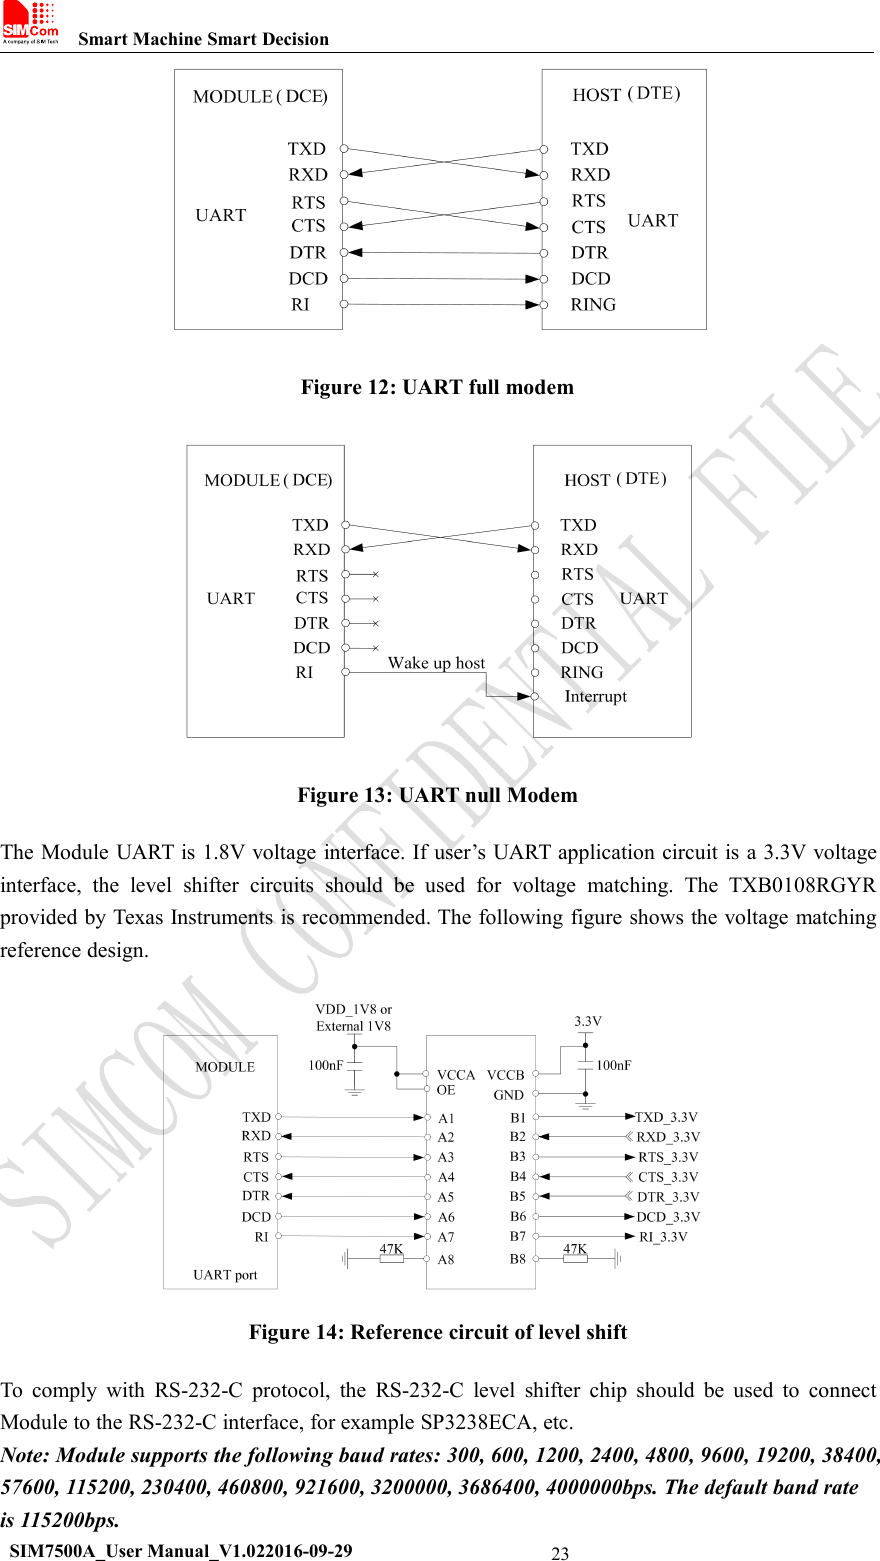 Smart Machine Smart DecisionSIM7500A_User Manual_V1.022016-09-2923Figure 12: UART full modemFigure 13: UART null ModemThe Module UART is 1.8V voltage interface. If user’s UART application circuit is a 3.3V voltageinterface, the level shifter circuits should be used for voltage matching. The TXB0108RGYRprovided by Texas Instruments is recommended. The following figure shows the voltage matchingreference design.Figure 14: Reference circuit of level shiftTo comply with RS-232-C protocol, the RS-232-C level shifter chip should be used to connectModule to the RS-232-C interface, for example SP3238ECA, etc.Note: Module supports the following baud rates: 300, 600, 1200, 2400, 4800, 9600, 19200, 38400,57600, 115200, 230400, 460800, 921600, 3200000, 3686400, 4000000bps. The default band rateis 115200bps.